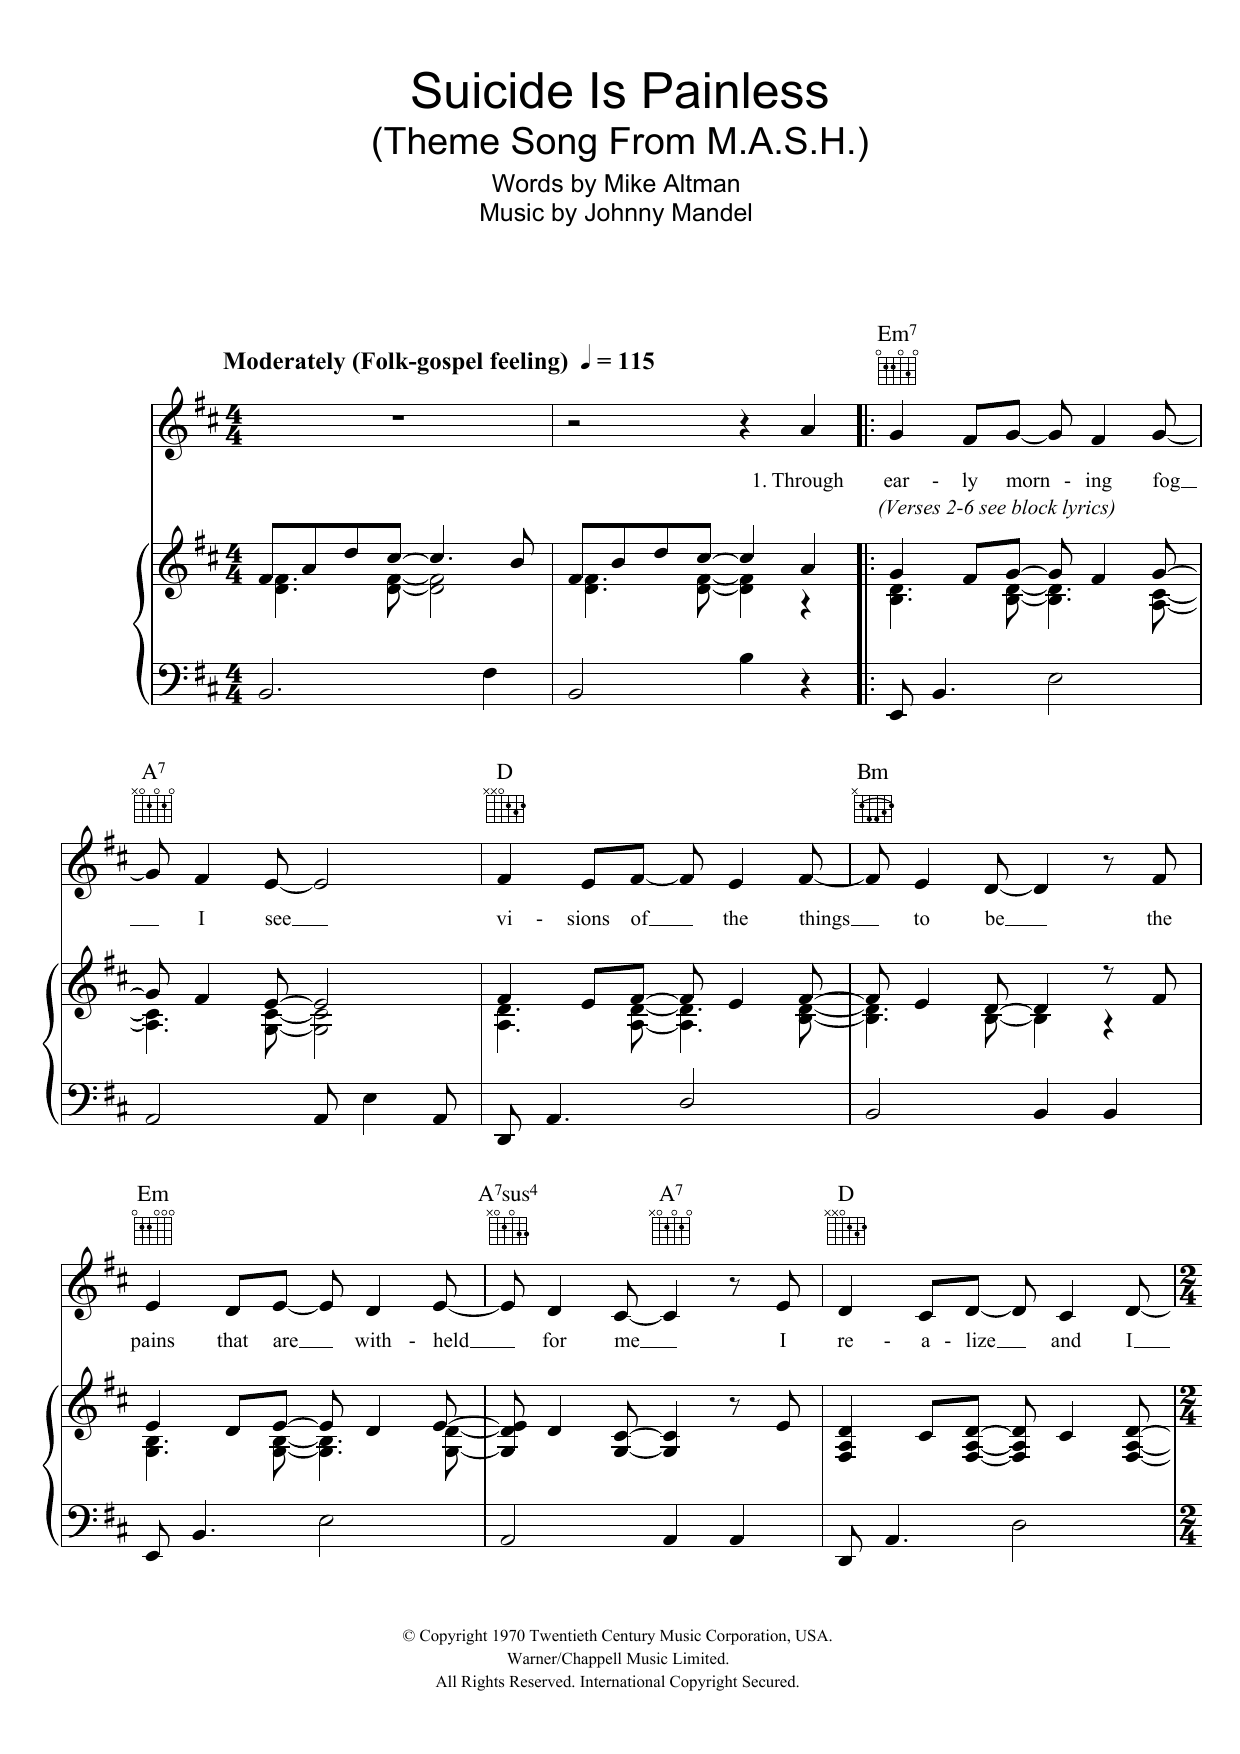 Download Johnny Mandel Song From M*A*S*H (Suicide Is Painless) Sheet Music